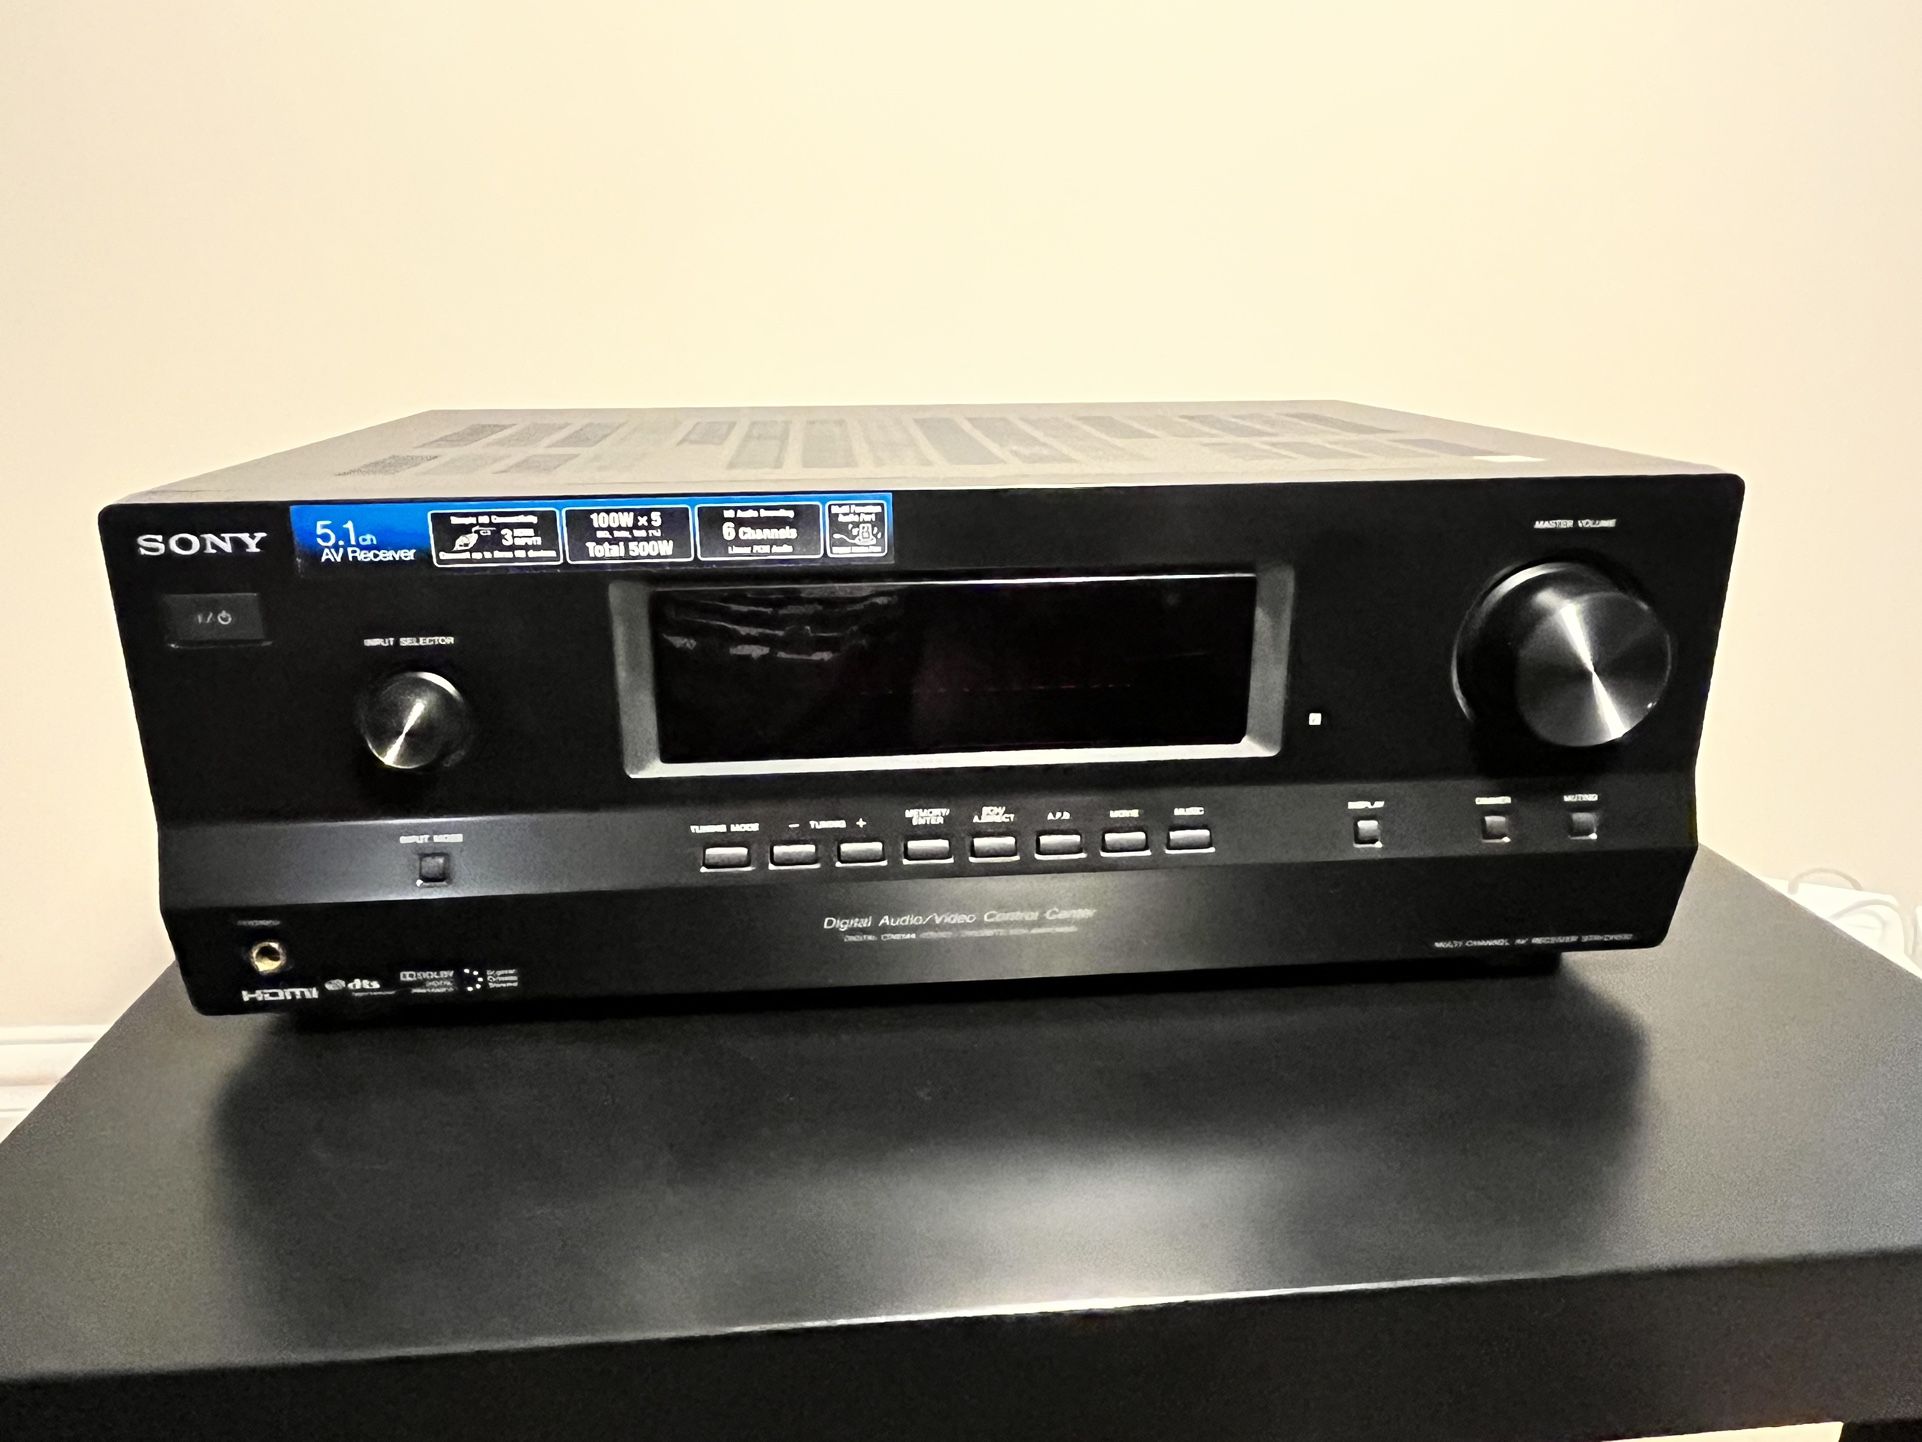 Sony STR-DH510 5.1-Channel Home Theater Receiver with Remote